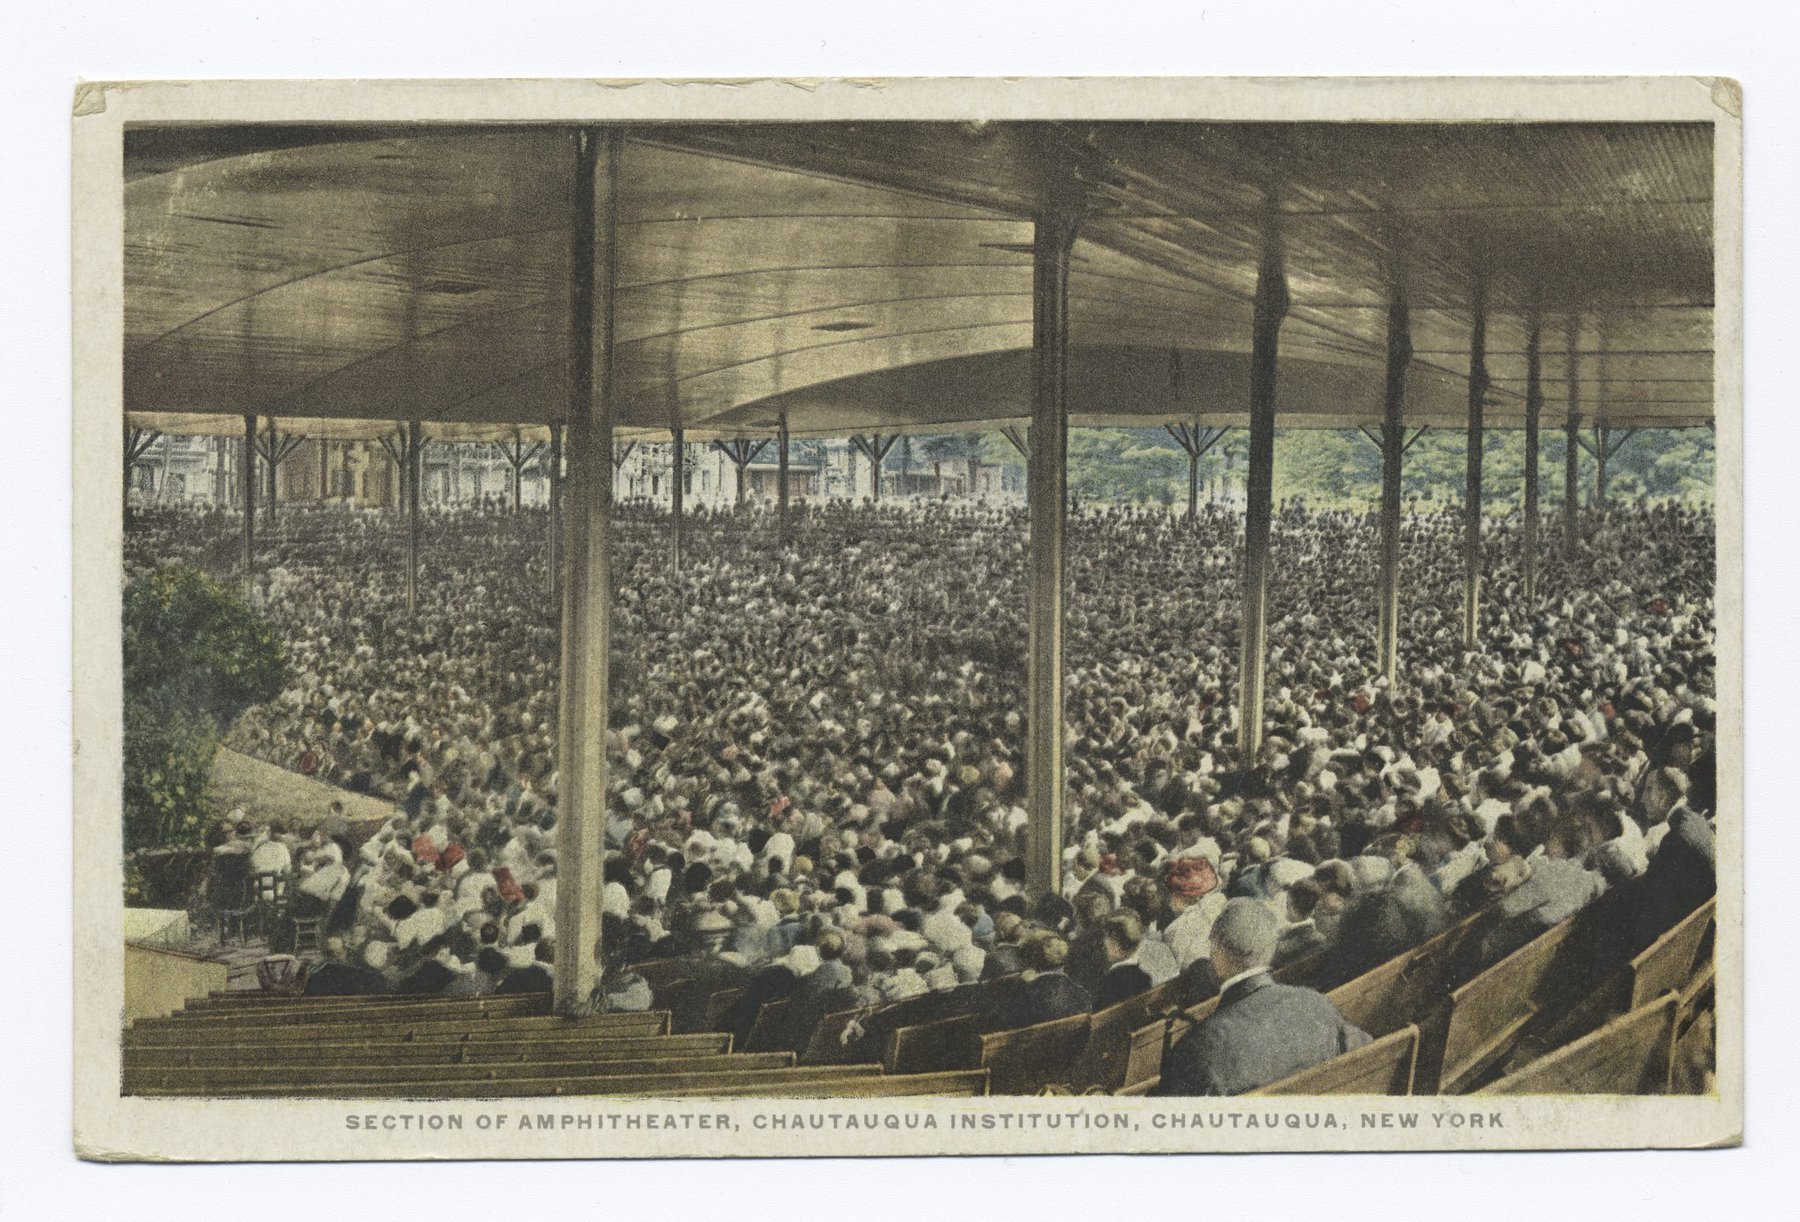 Historical view of the Amphitheater at the Chautauqua Institution in New York, scene of Friday, Aug. 12's attack on Salman Rushdie. [Image from New York Public Library via Wikimedia Commons.]